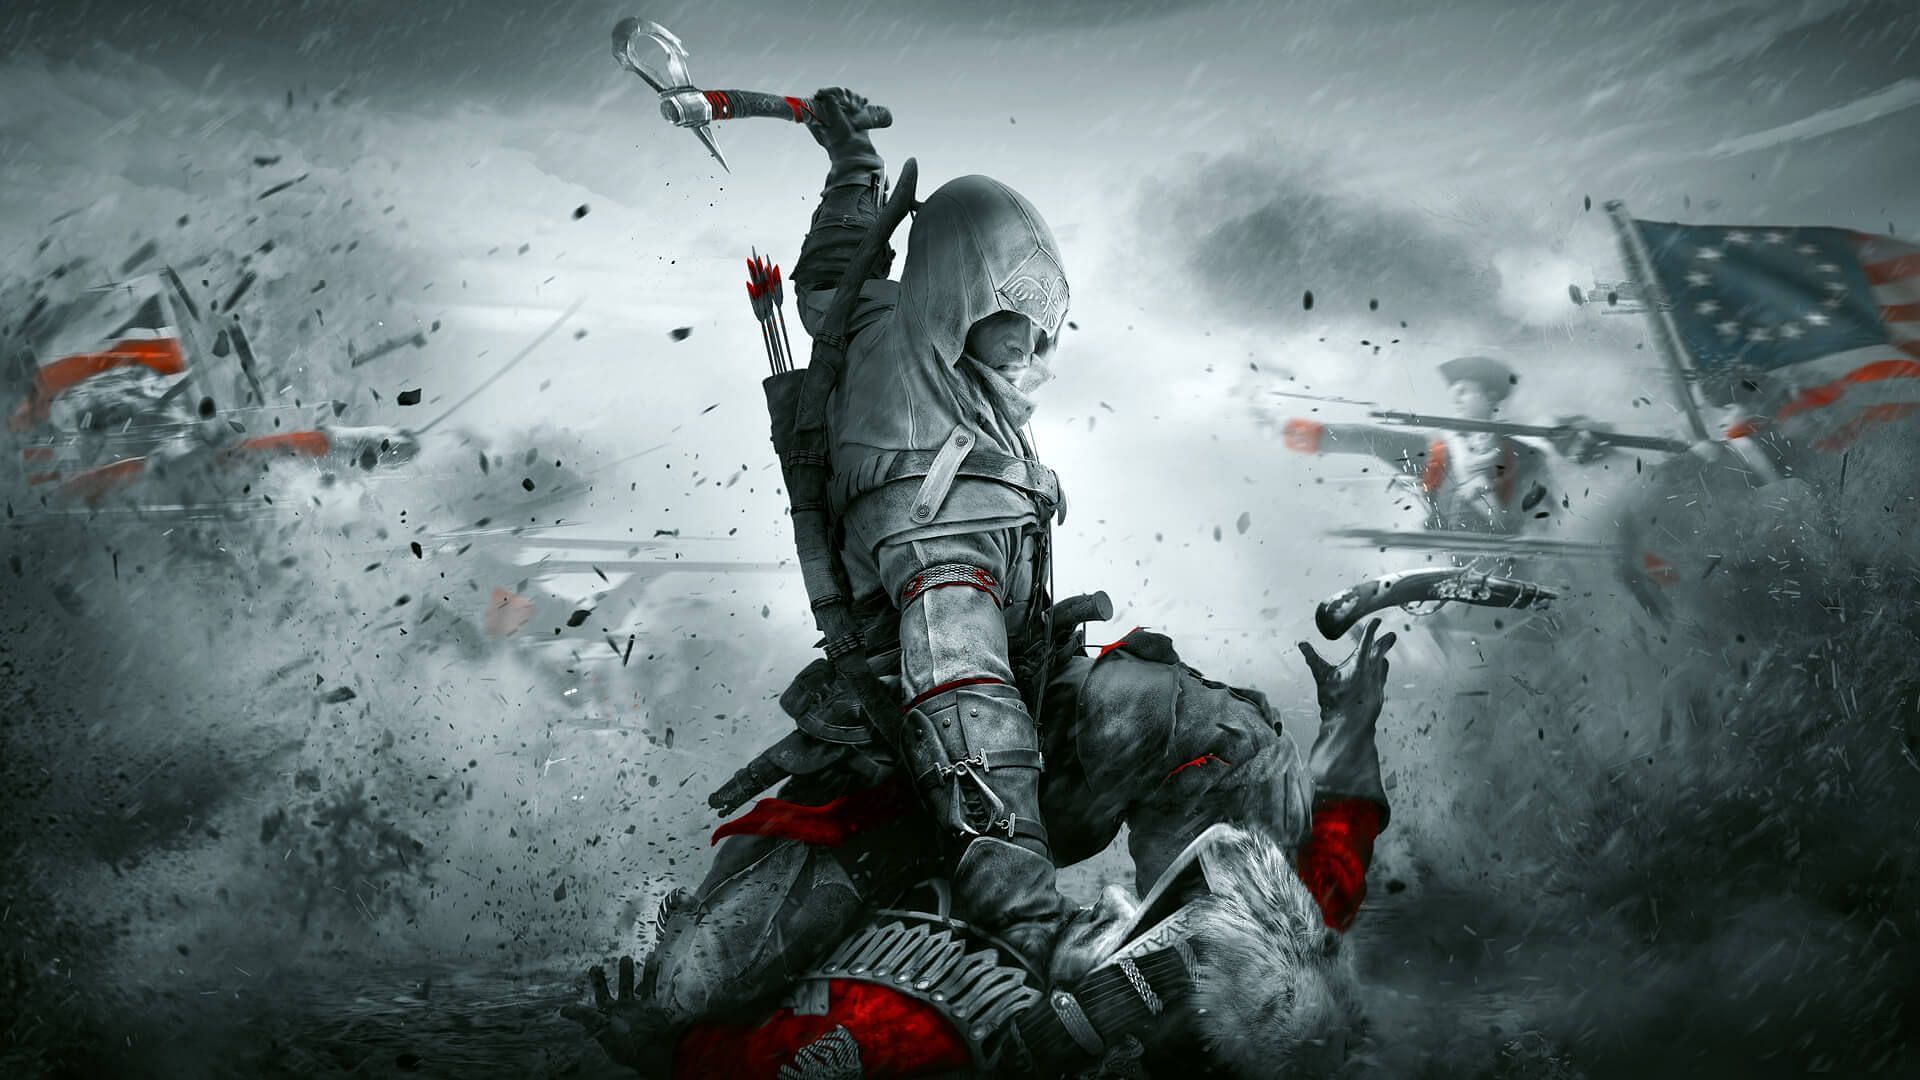 Connor Kenway in AC 3 (Image via Ubisoft)